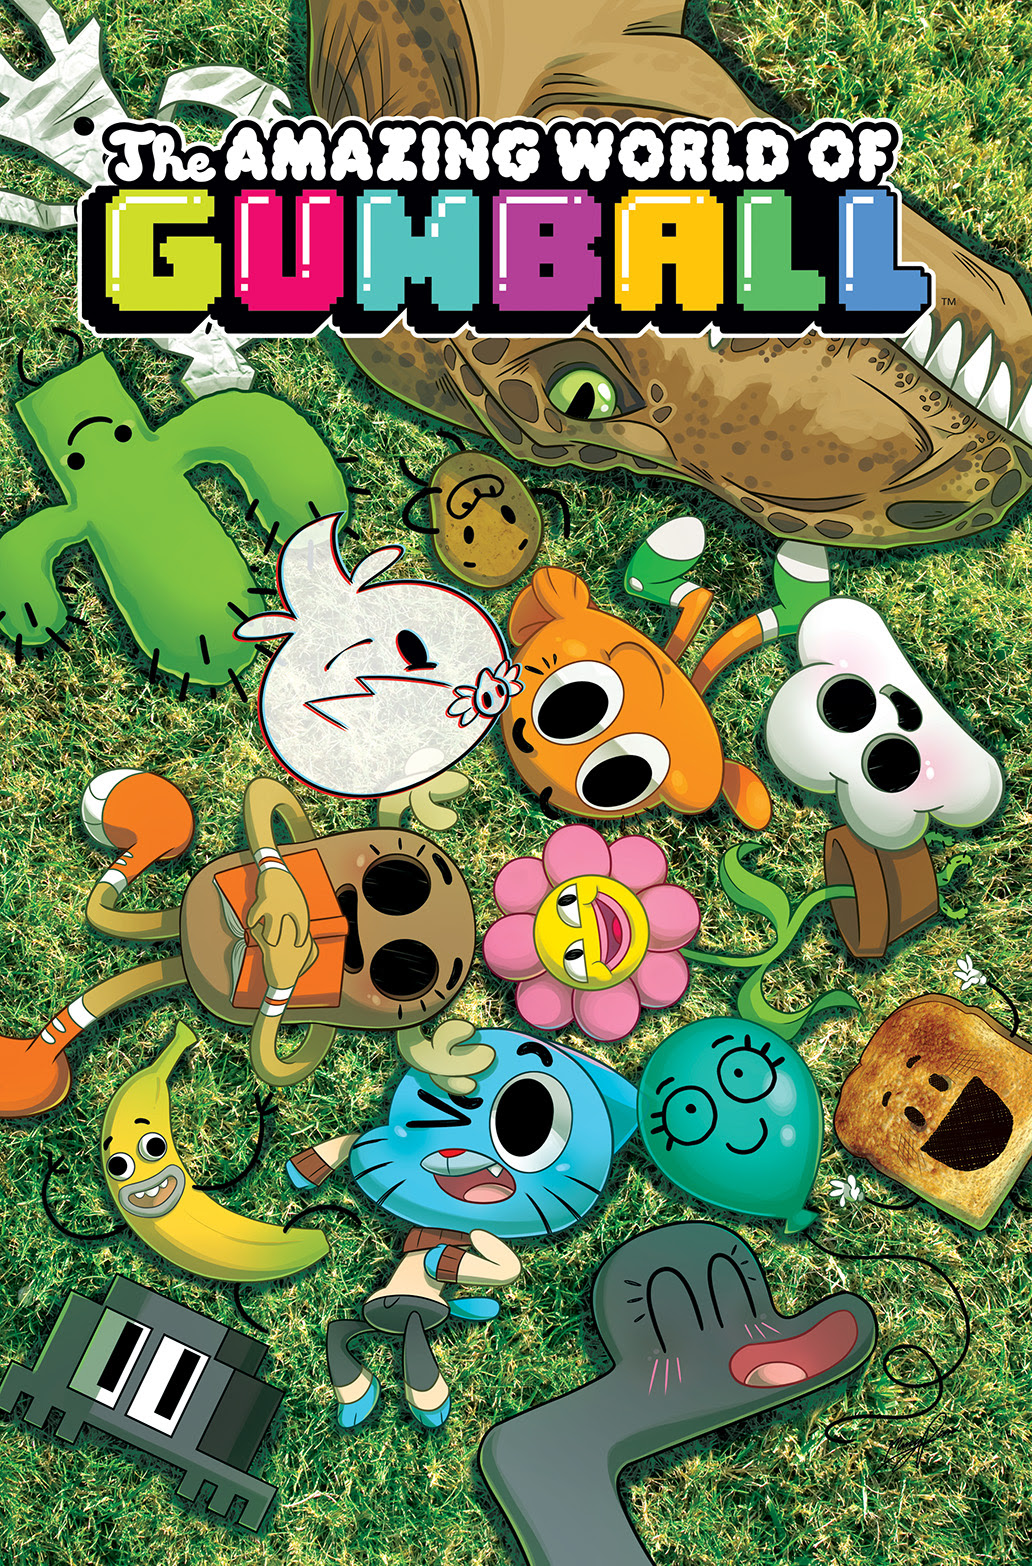 THE AMAZING WORLD OF GUMBALL #4 Cover A by Missy Pena